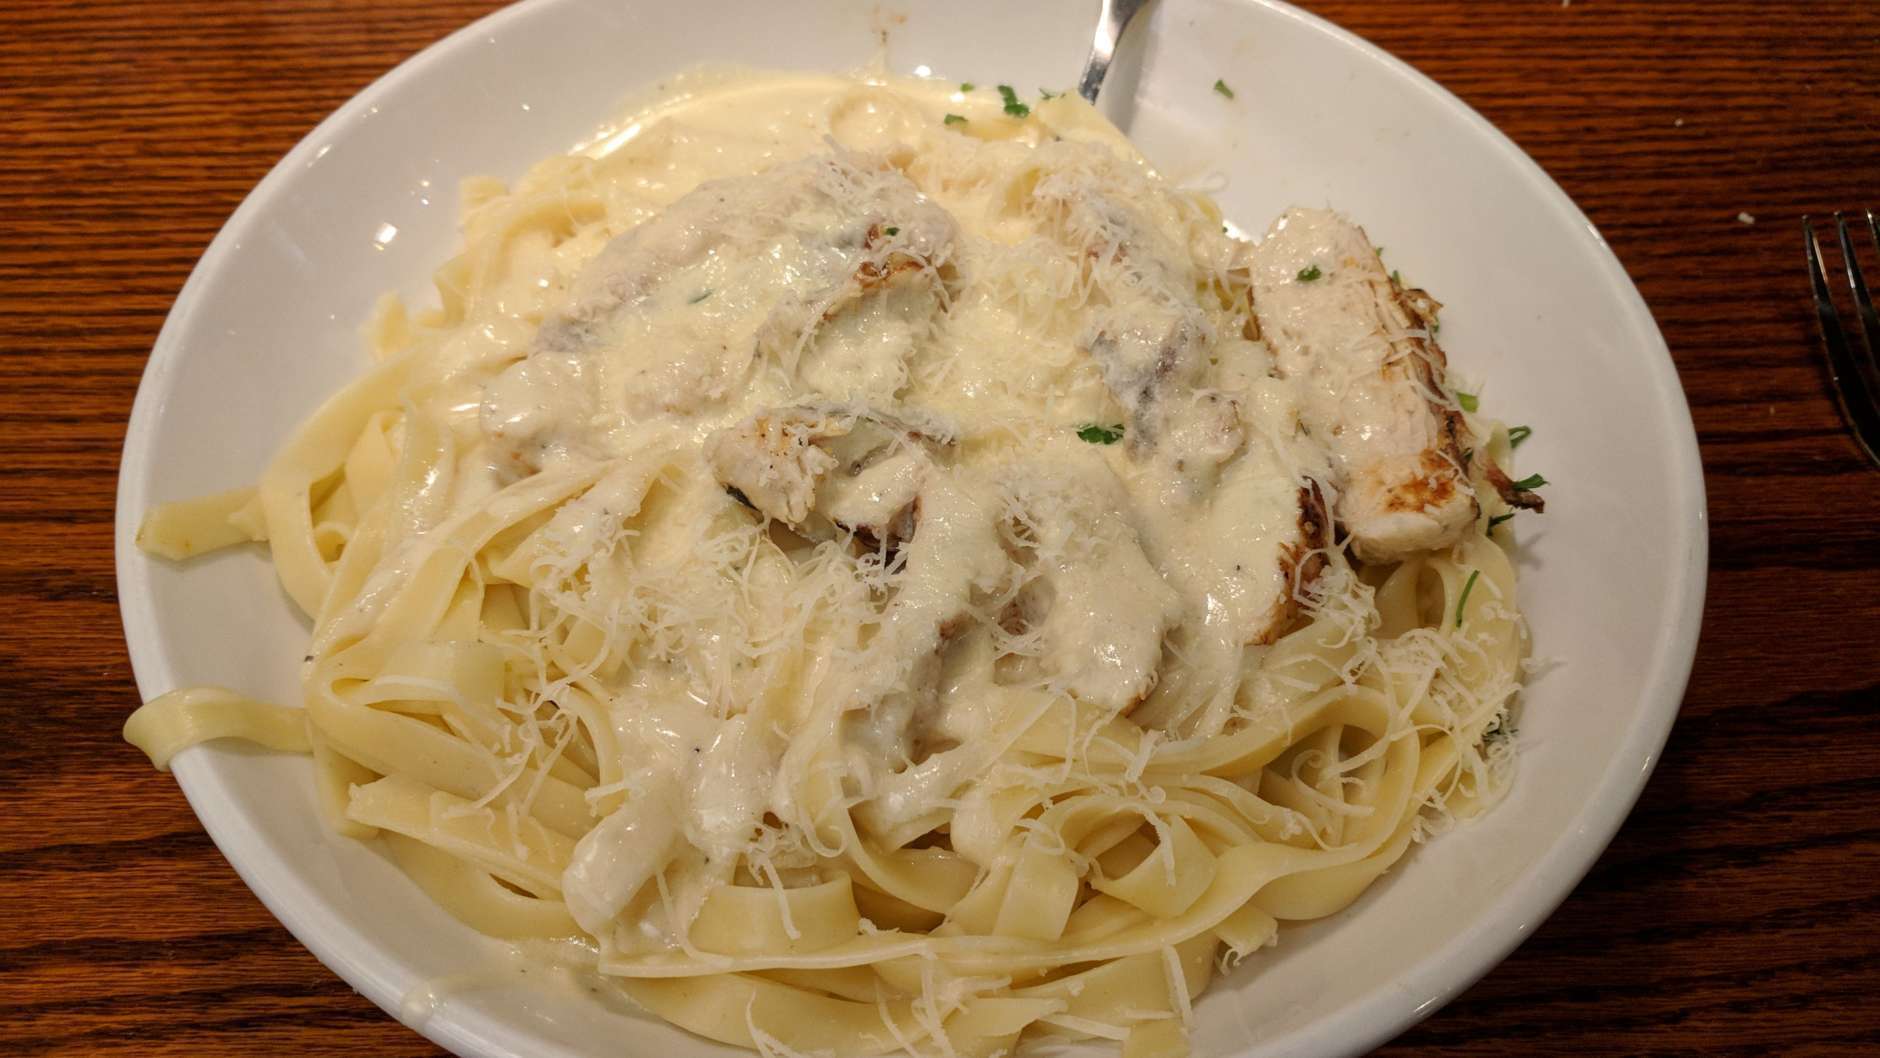 The meal: Fettuccine with Alfredo and grilled chicken. (WTOP/Brandon Millman)